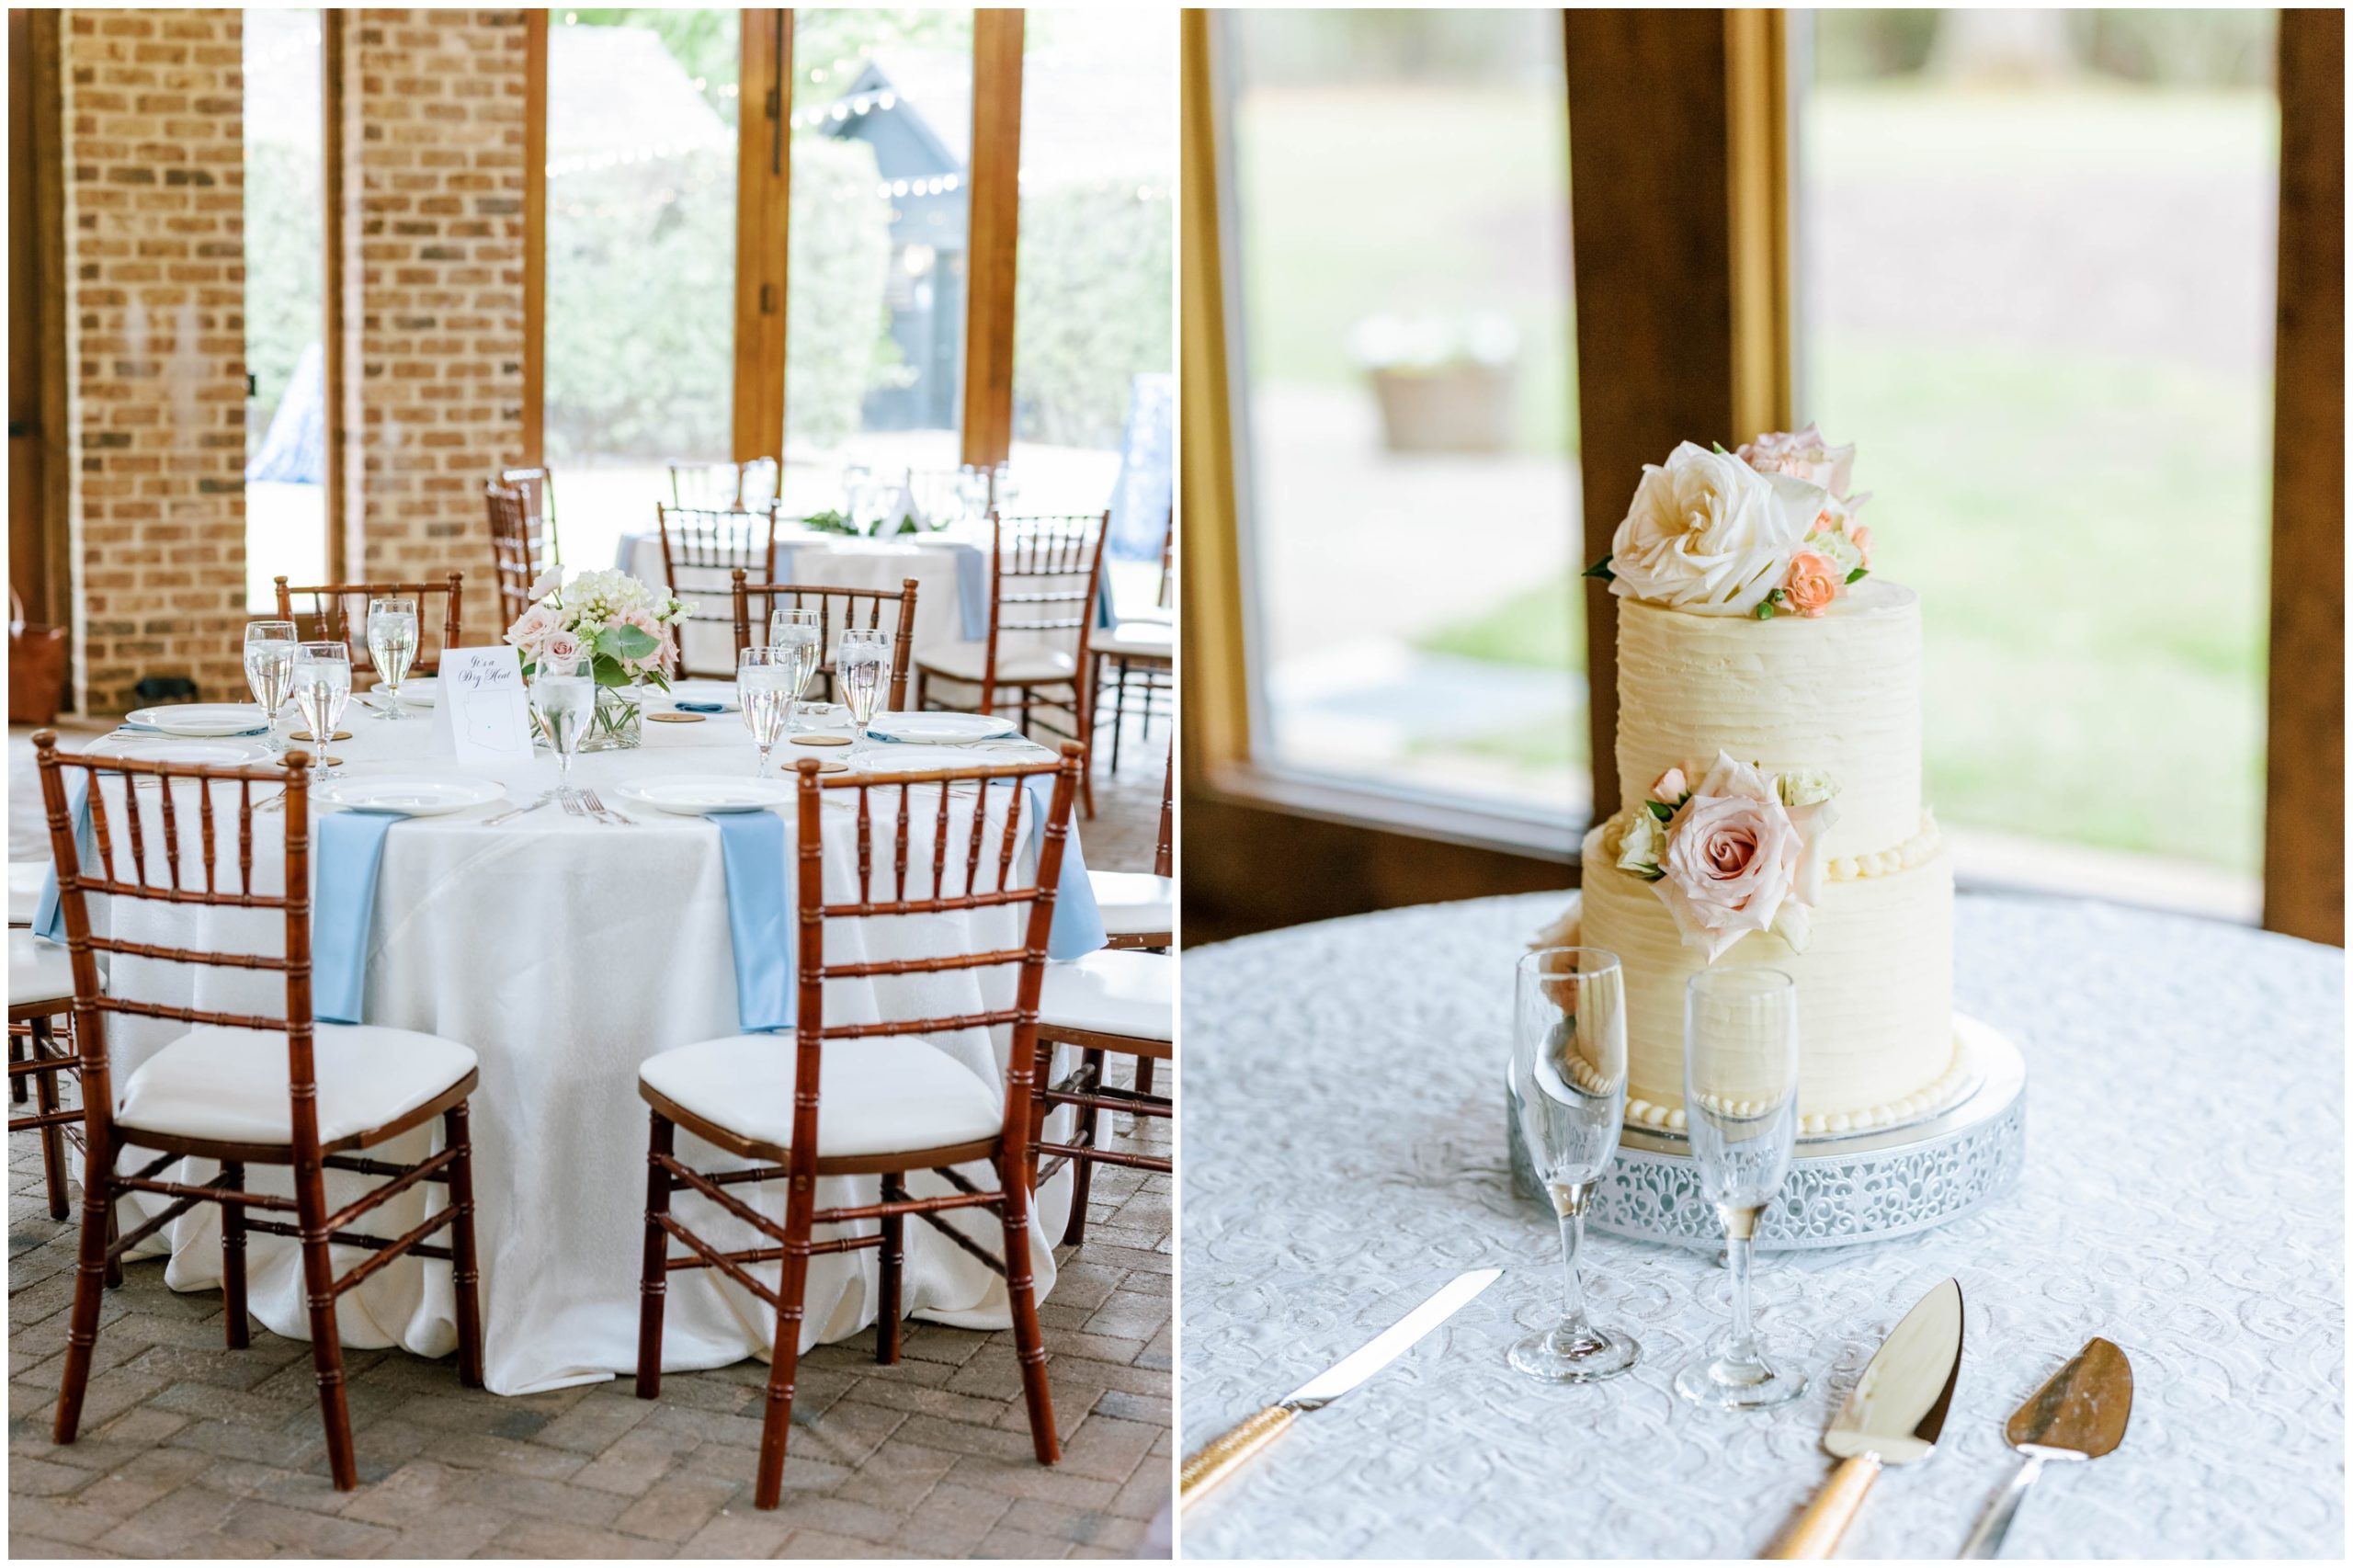 White lace tablecloths, blush florals, and blue cloth napkins for a spring wedding reception